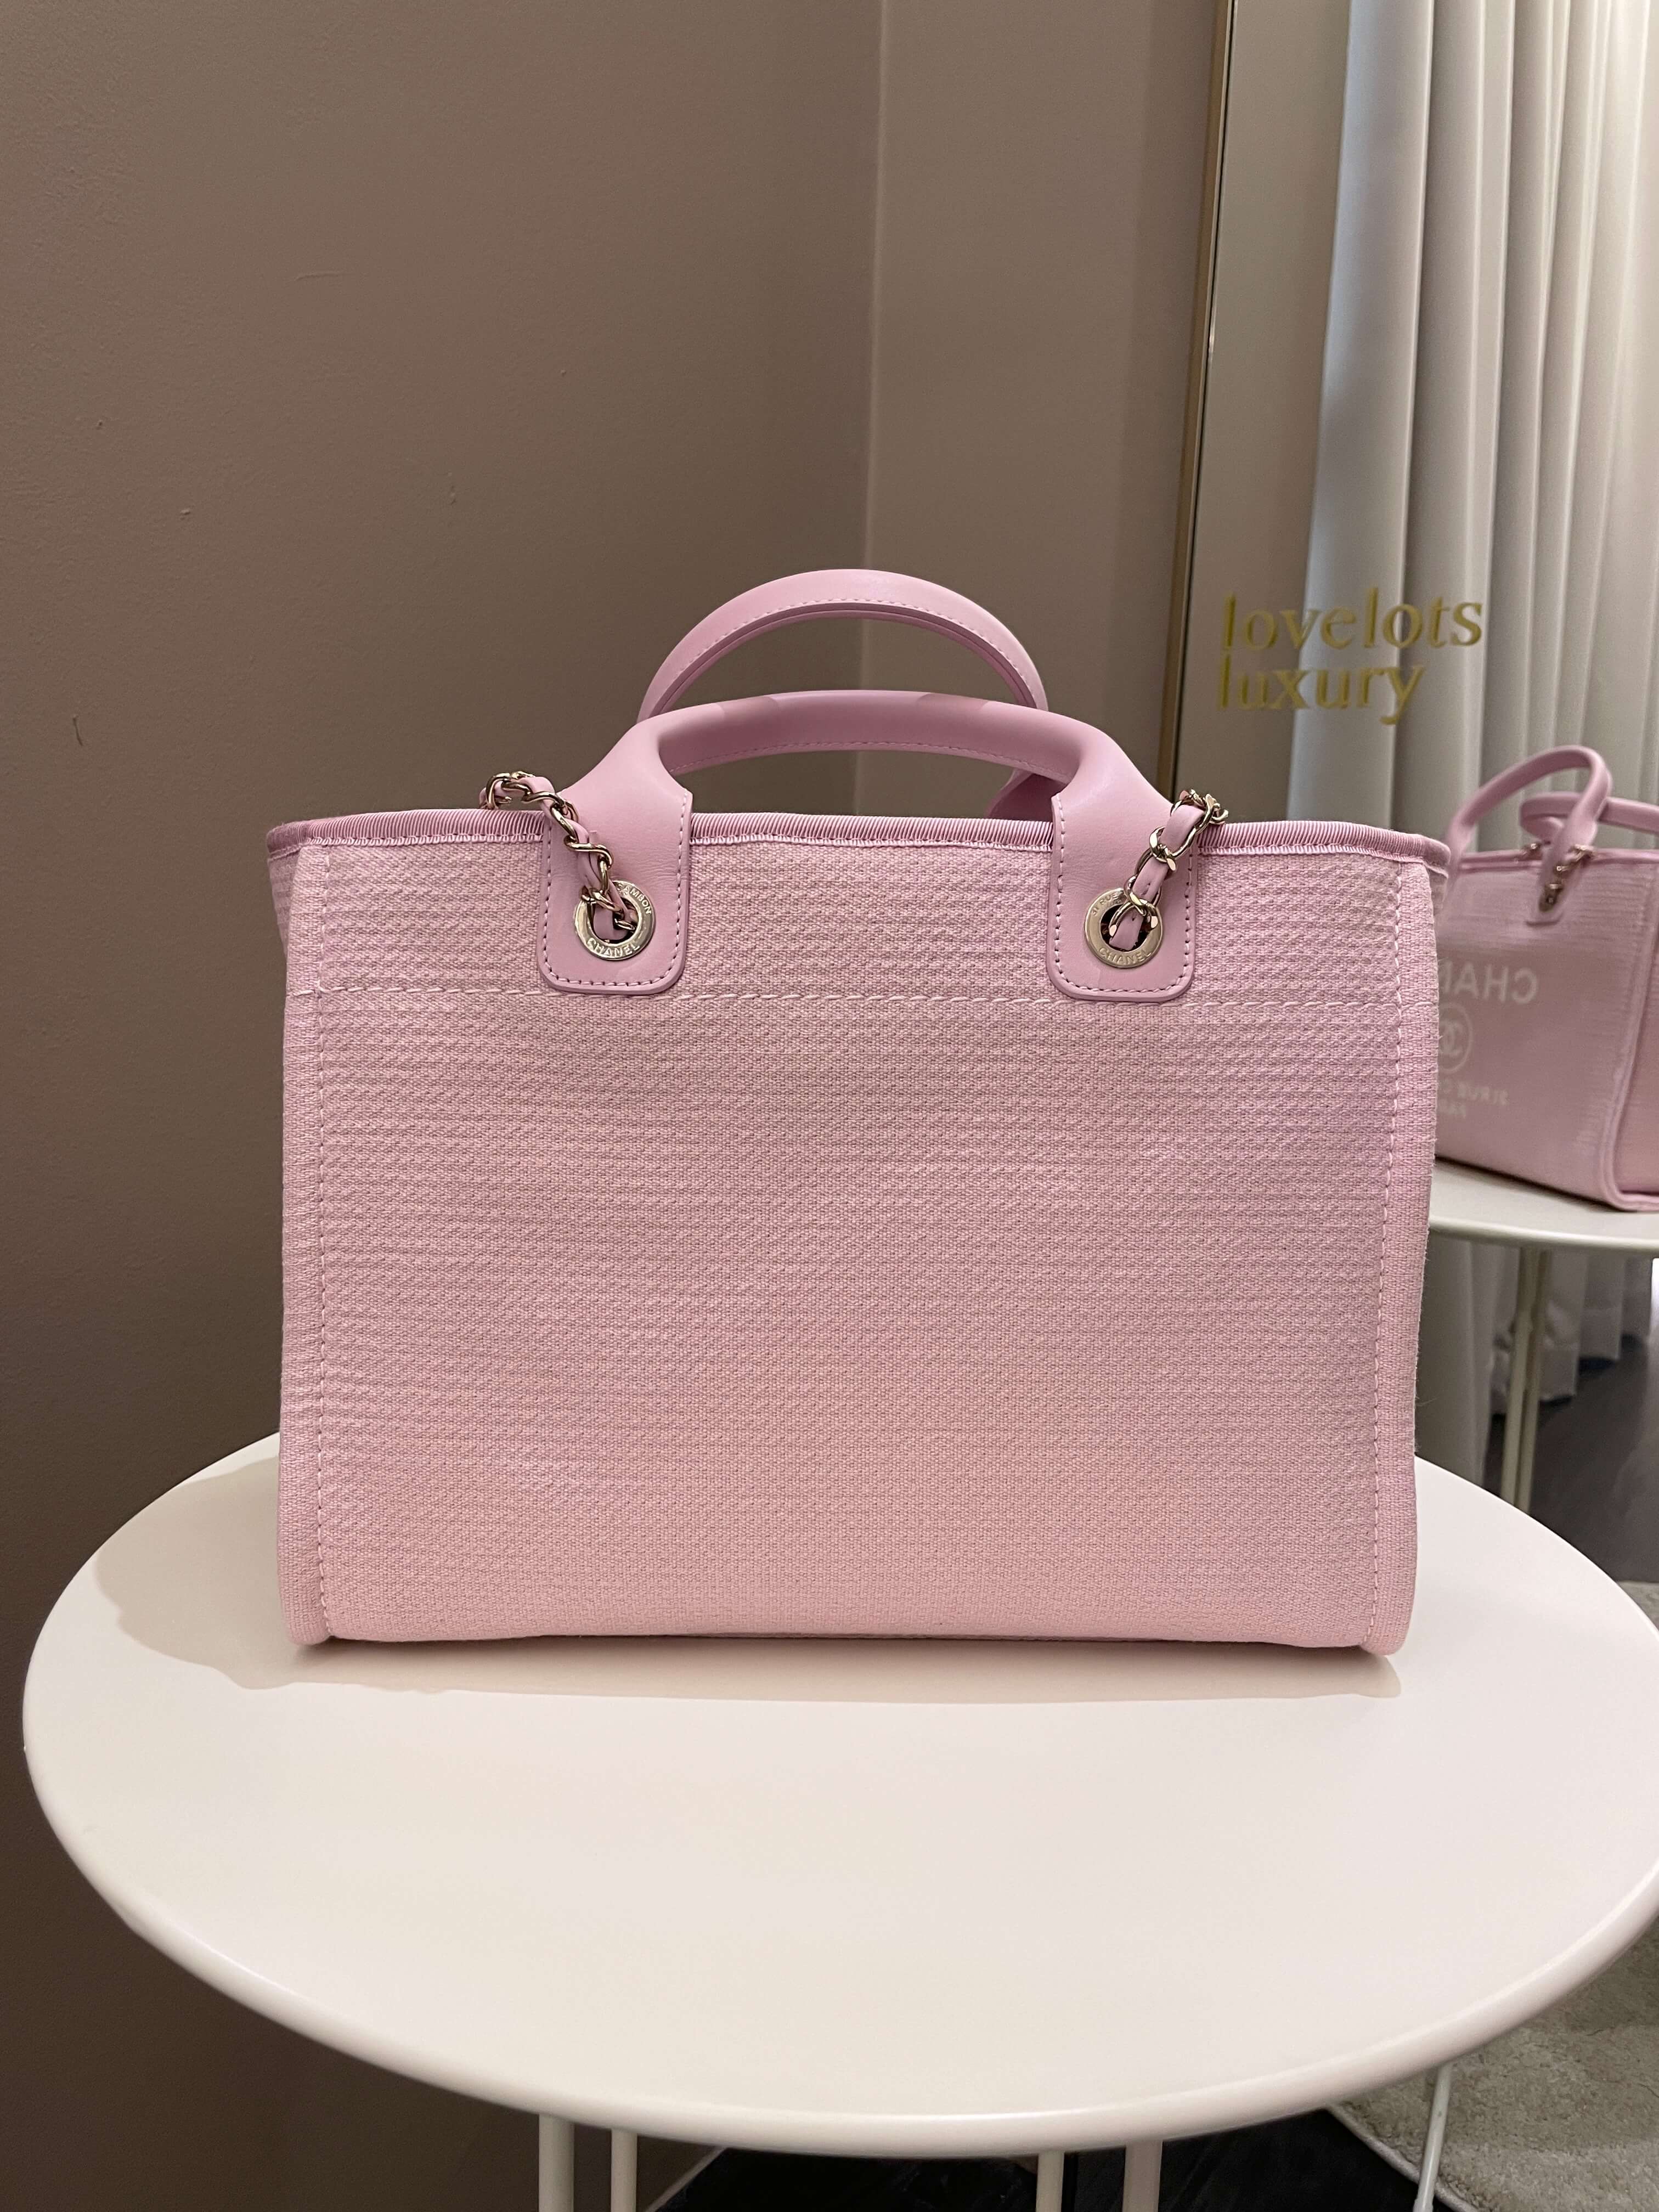 Chanel Canvas Large Deauville Tote Pink 19C